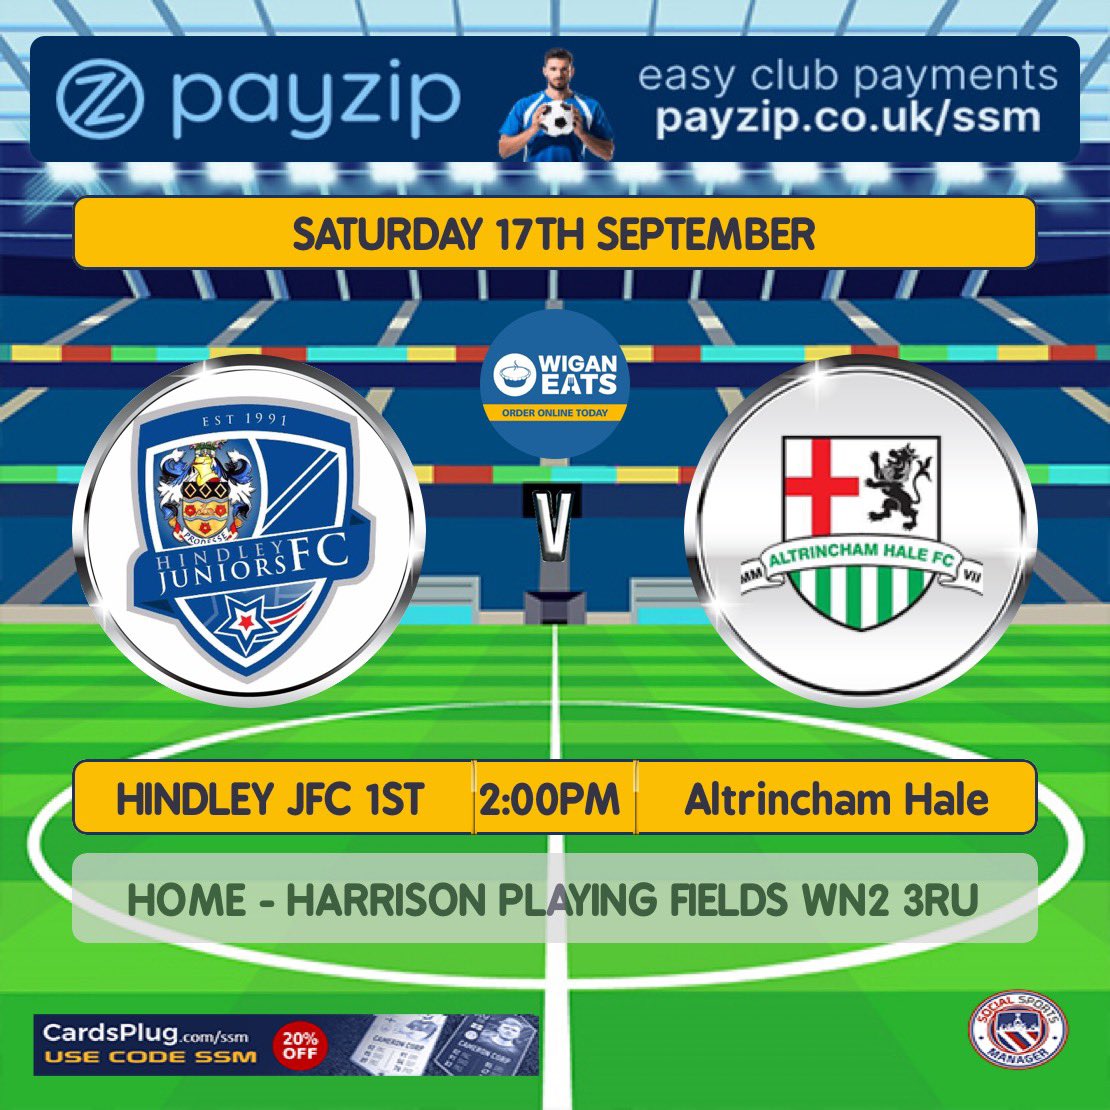 Next match for the deers this weekend, come down and show your support #hjfc #oneclub @AltrinchamHale